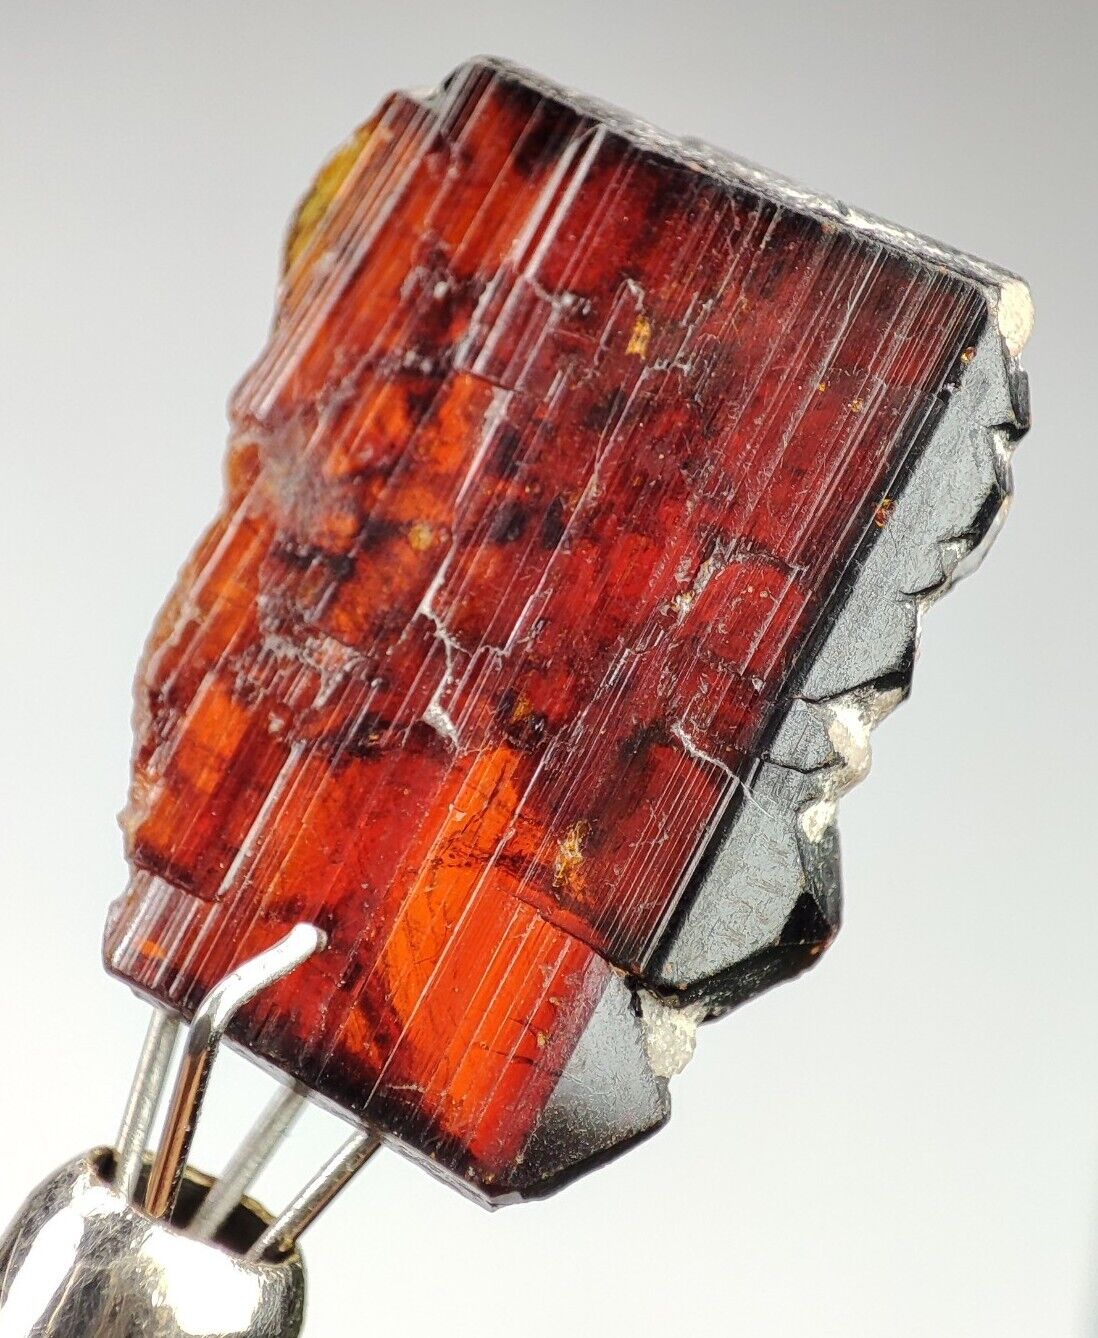 10-CT Extremely Rare Transparent Red Tantalite Gemmy Crystal @Afghanistan